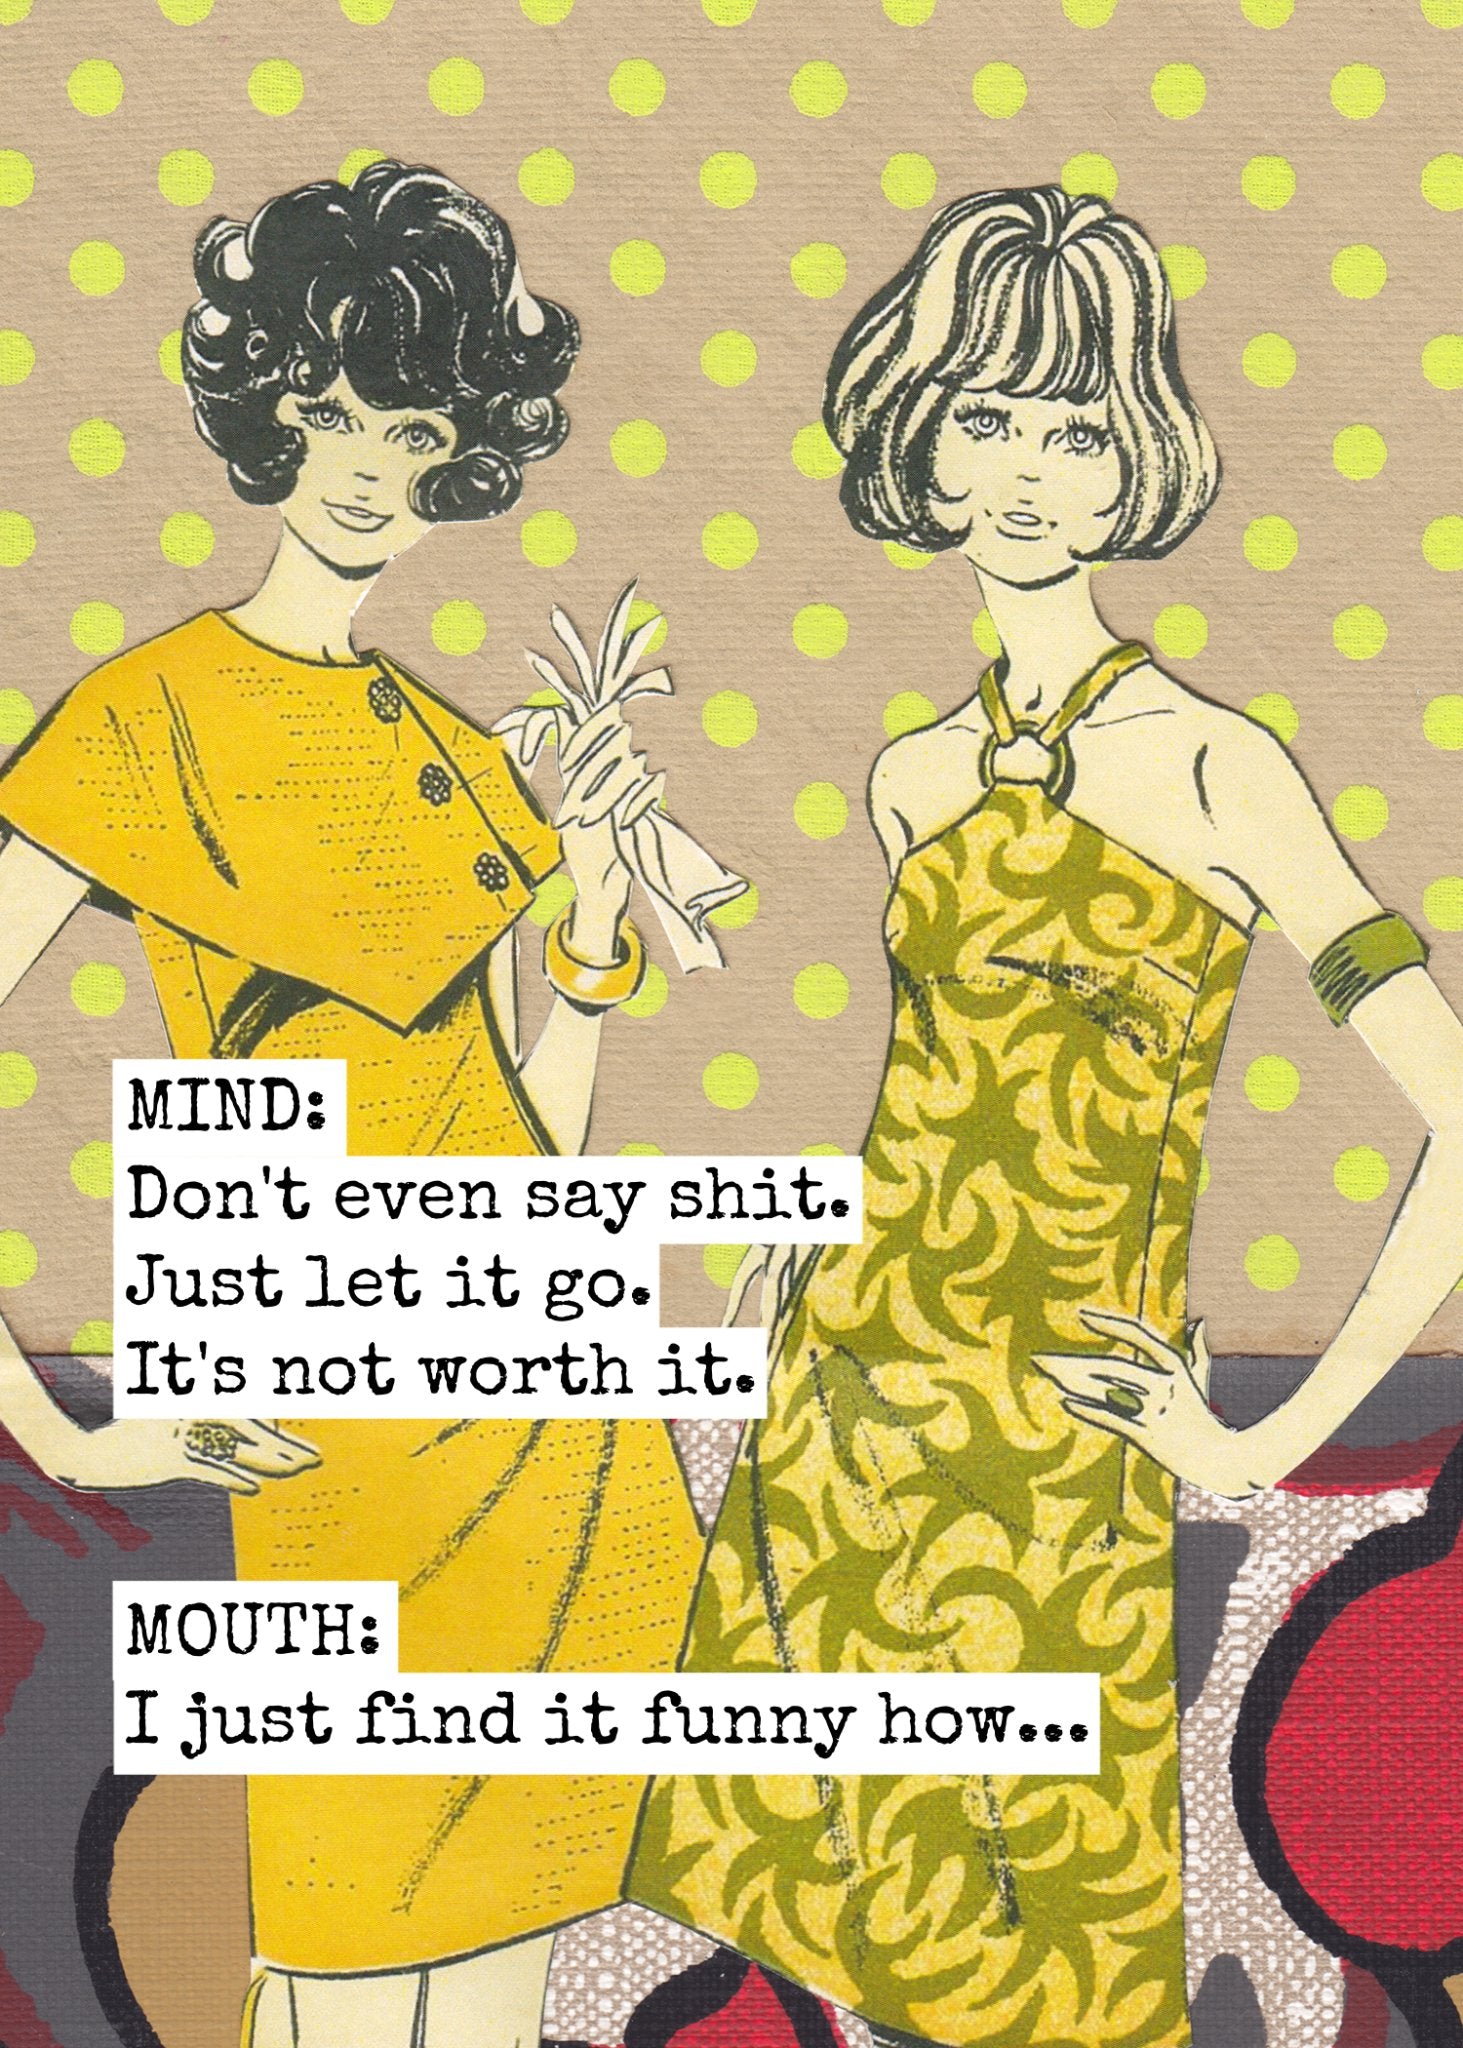 Funny Greeting Card. MIND: Don't Even Say Shit... - My Filosophy